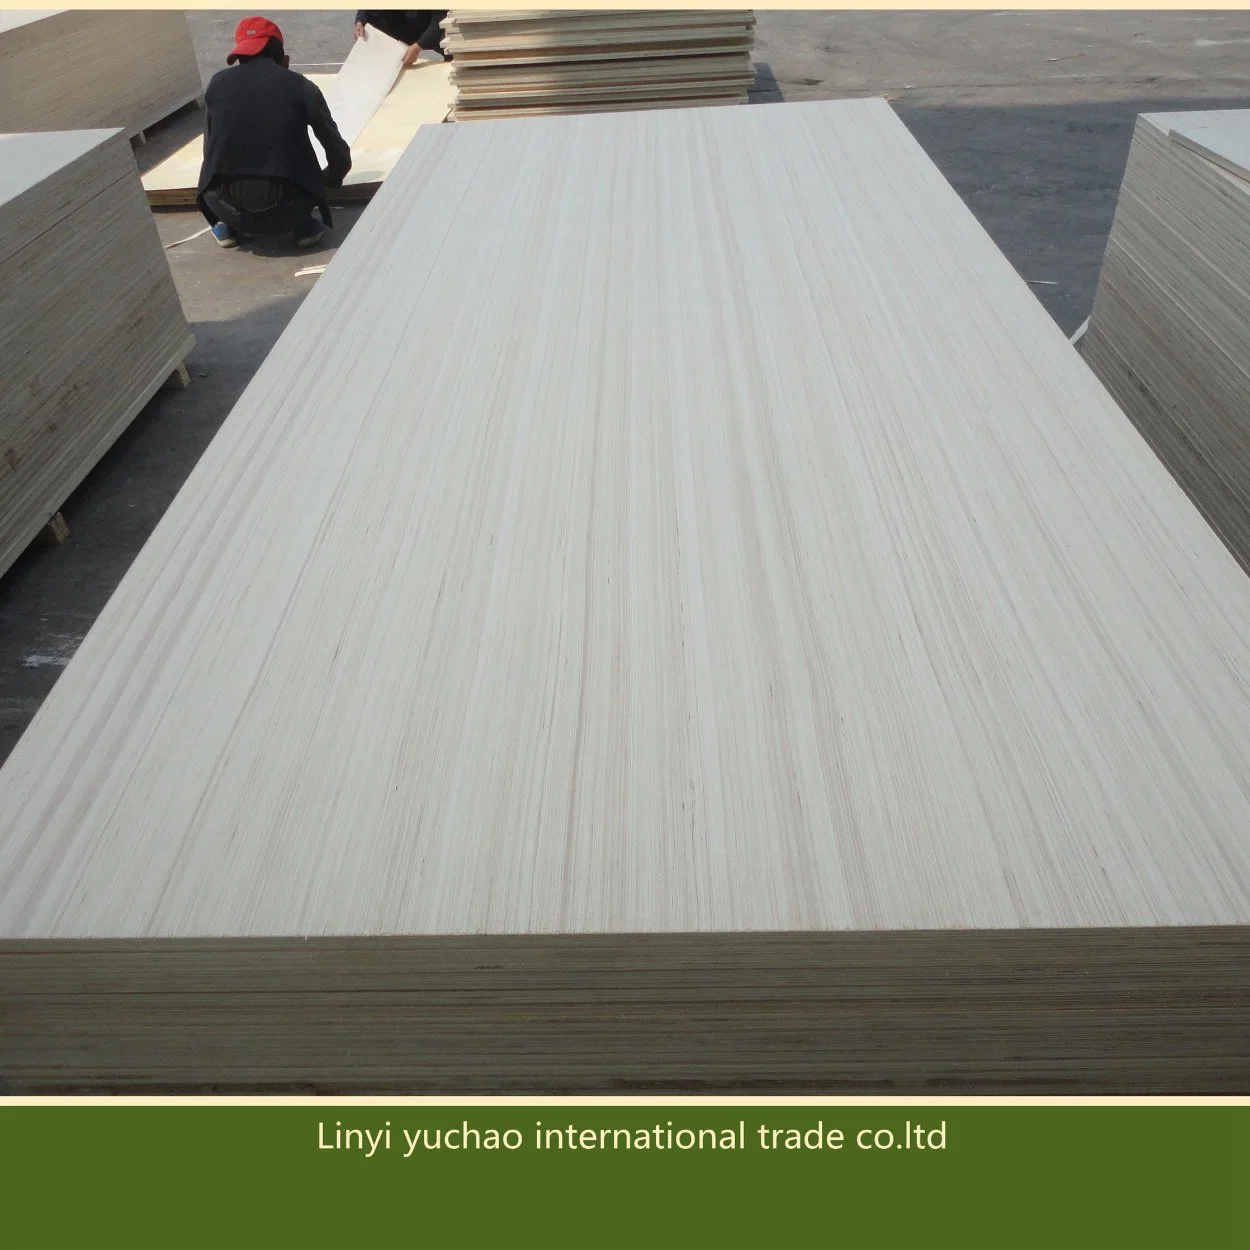 18mm Recon Veneer Face Commercial Plywood From Linyi